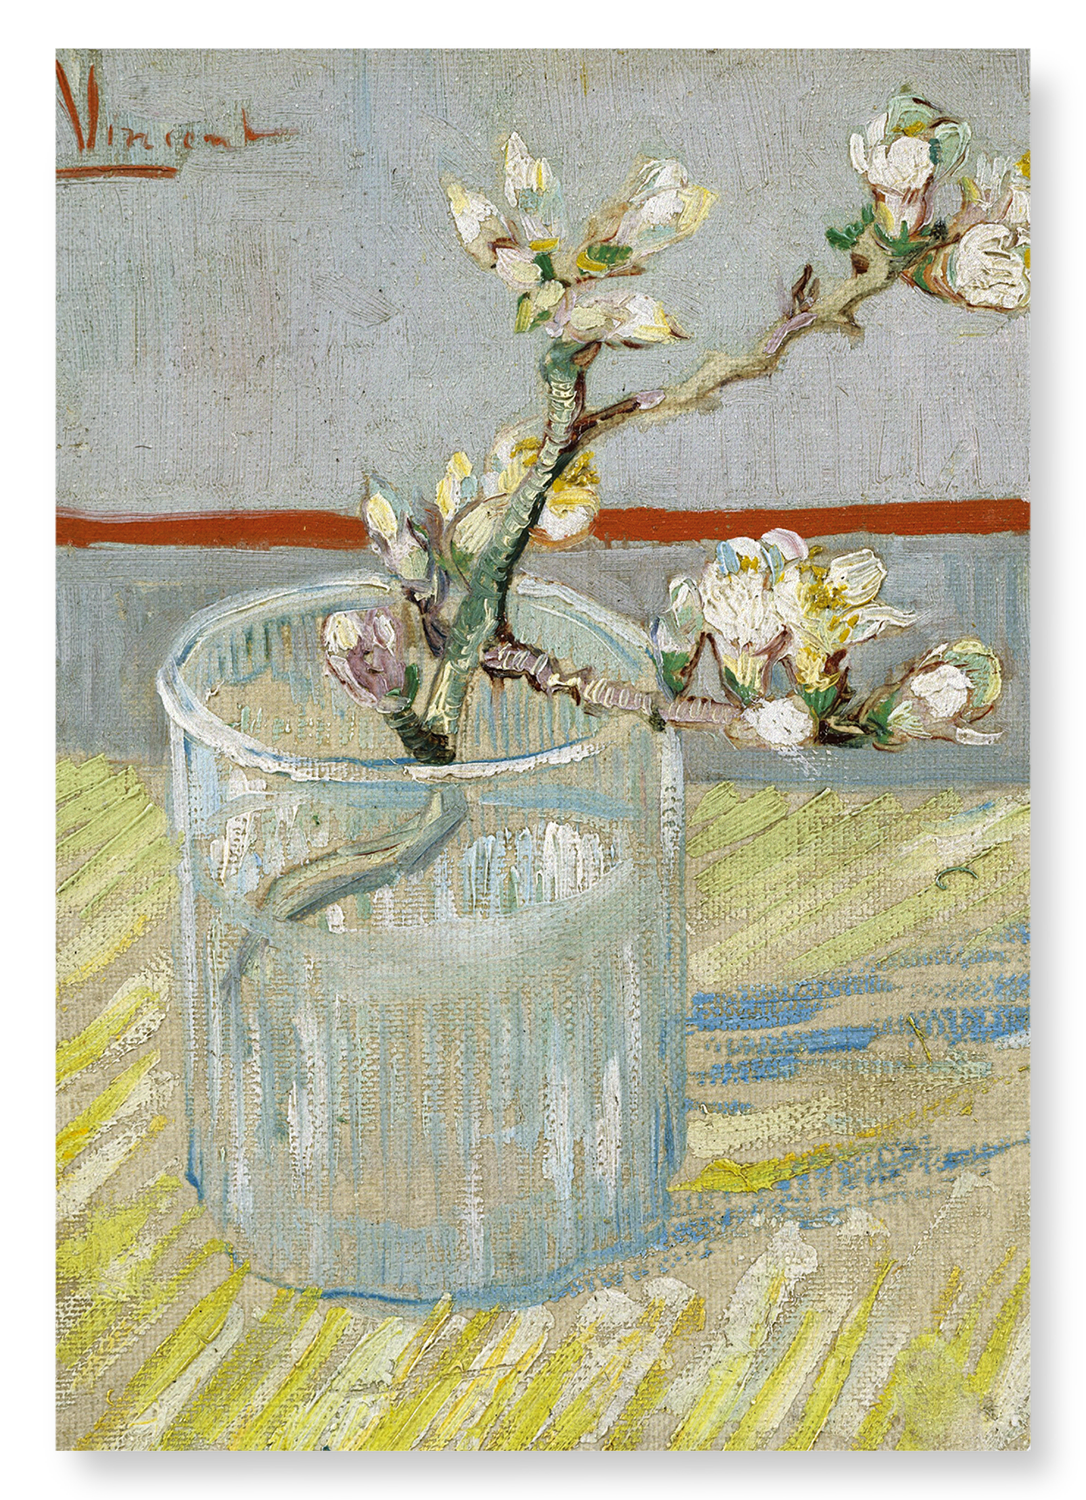 SPRIG OF FLOWERING ALMOND IN A GLASS (1888)